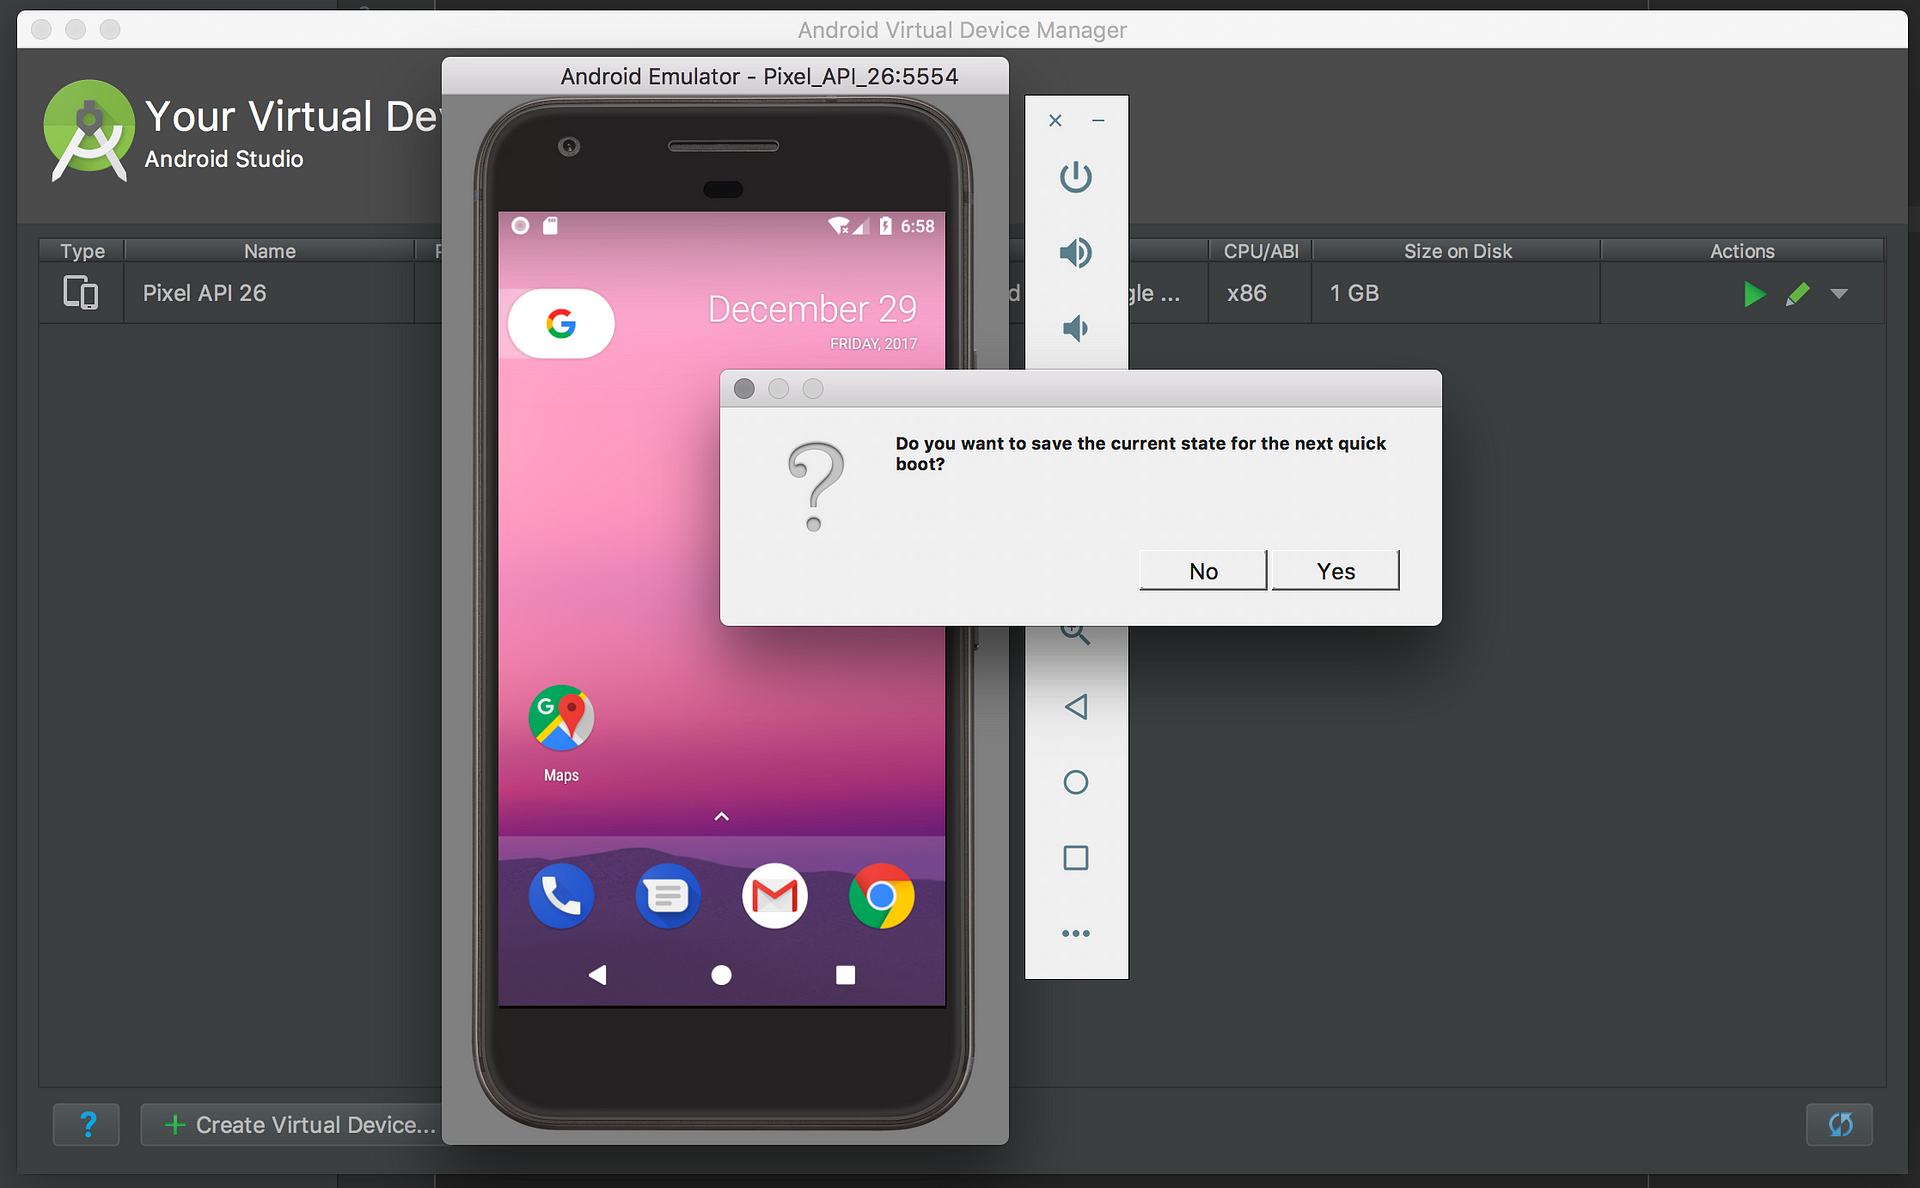 how to uninstall android emulator on mac